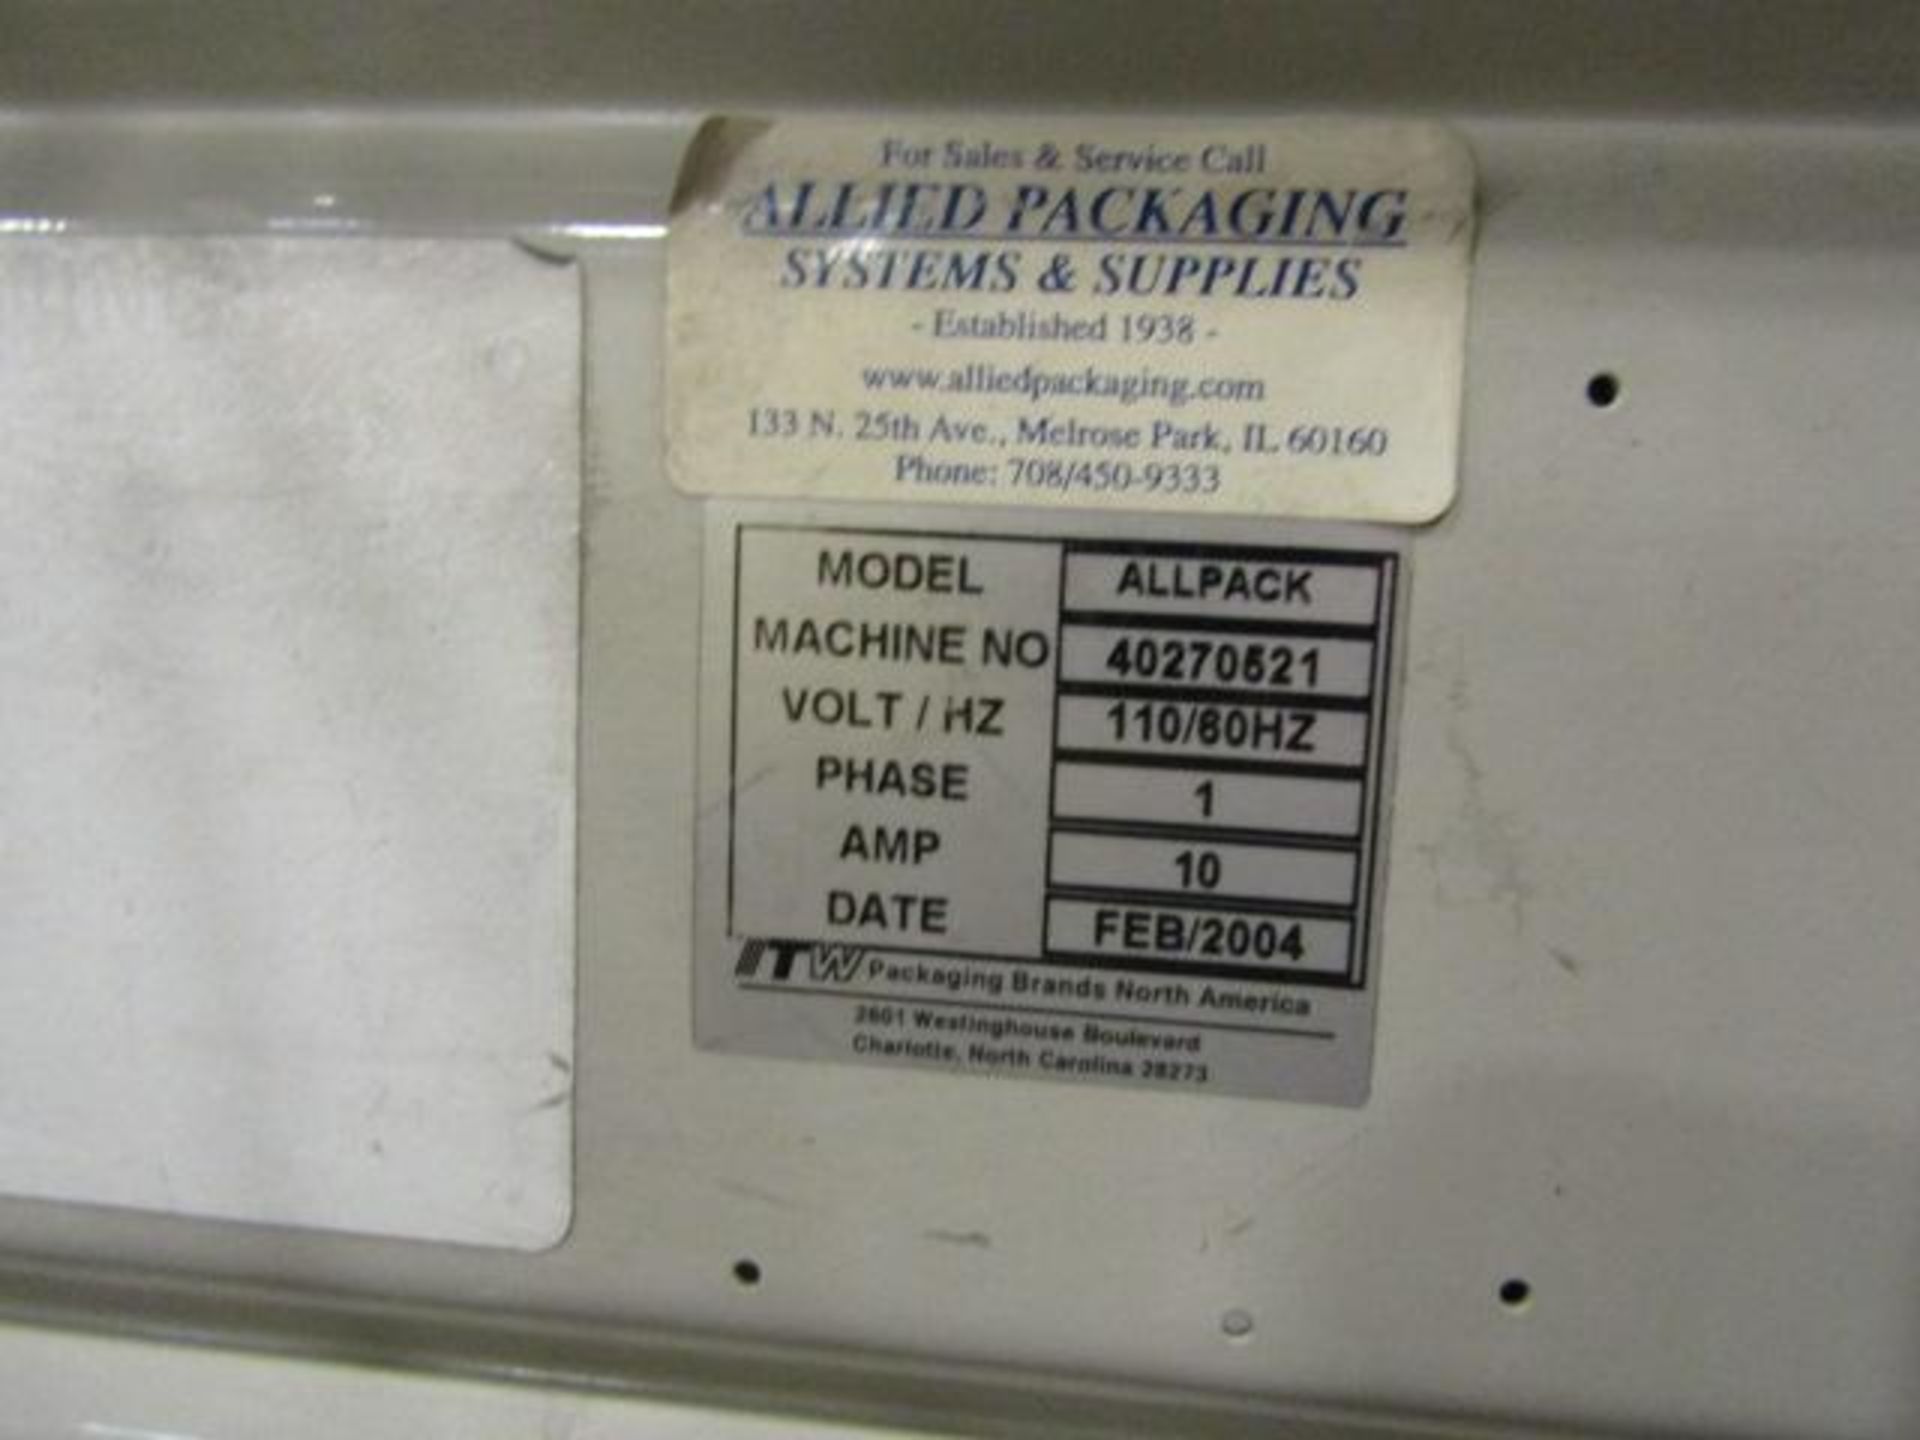 Allied Packaging Strapping Machine Model All Pack, S/N 40270521 - Image 2 of 2